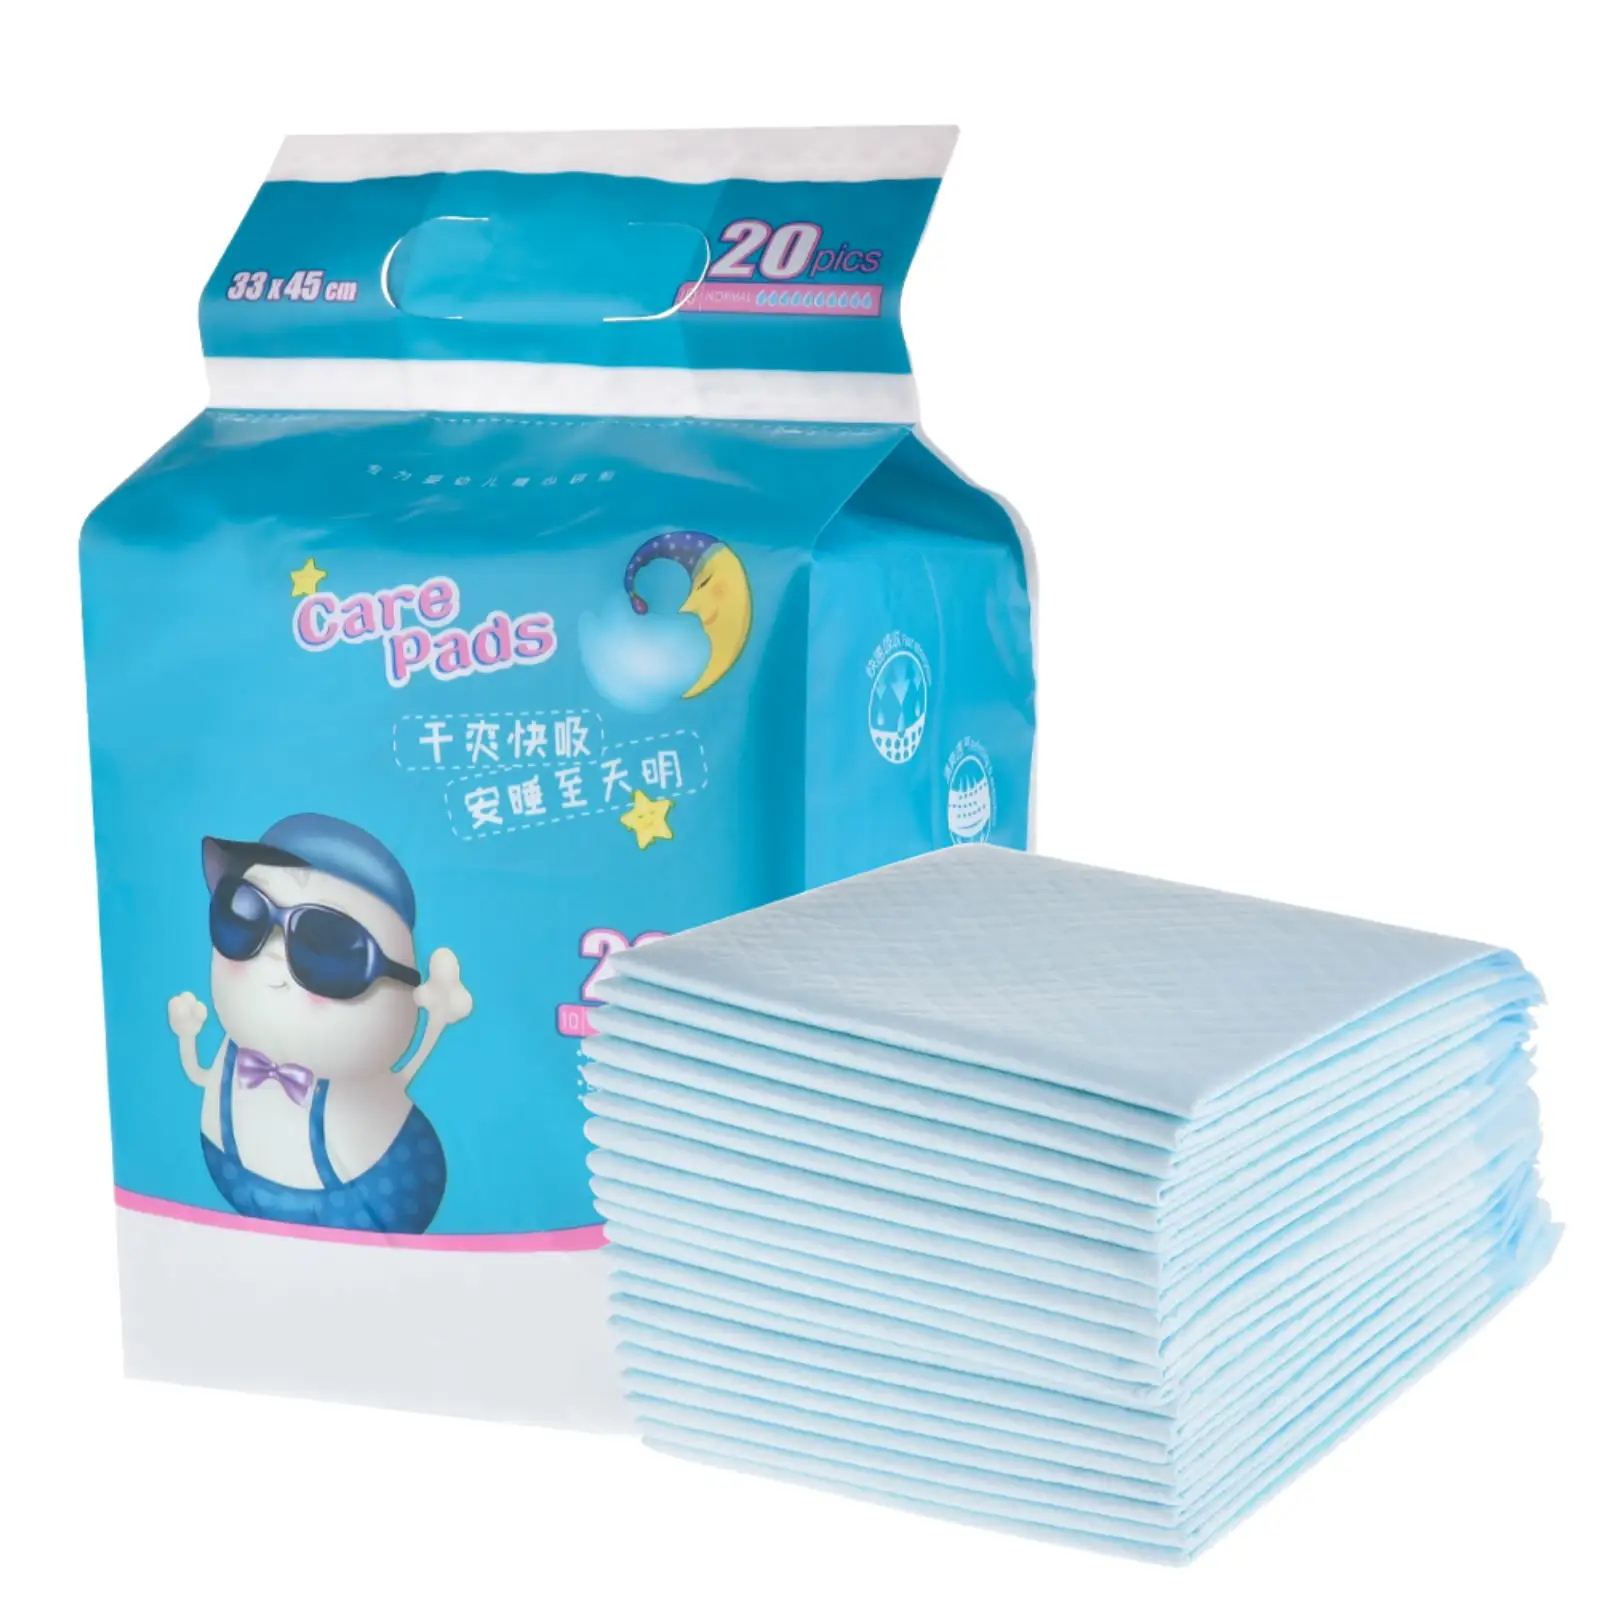 

20Pcs Disposable Changing Pads Soft Water Absorption Nappy Care Diaper Pad Cover Underpads For Baby Adult Elderly Patients